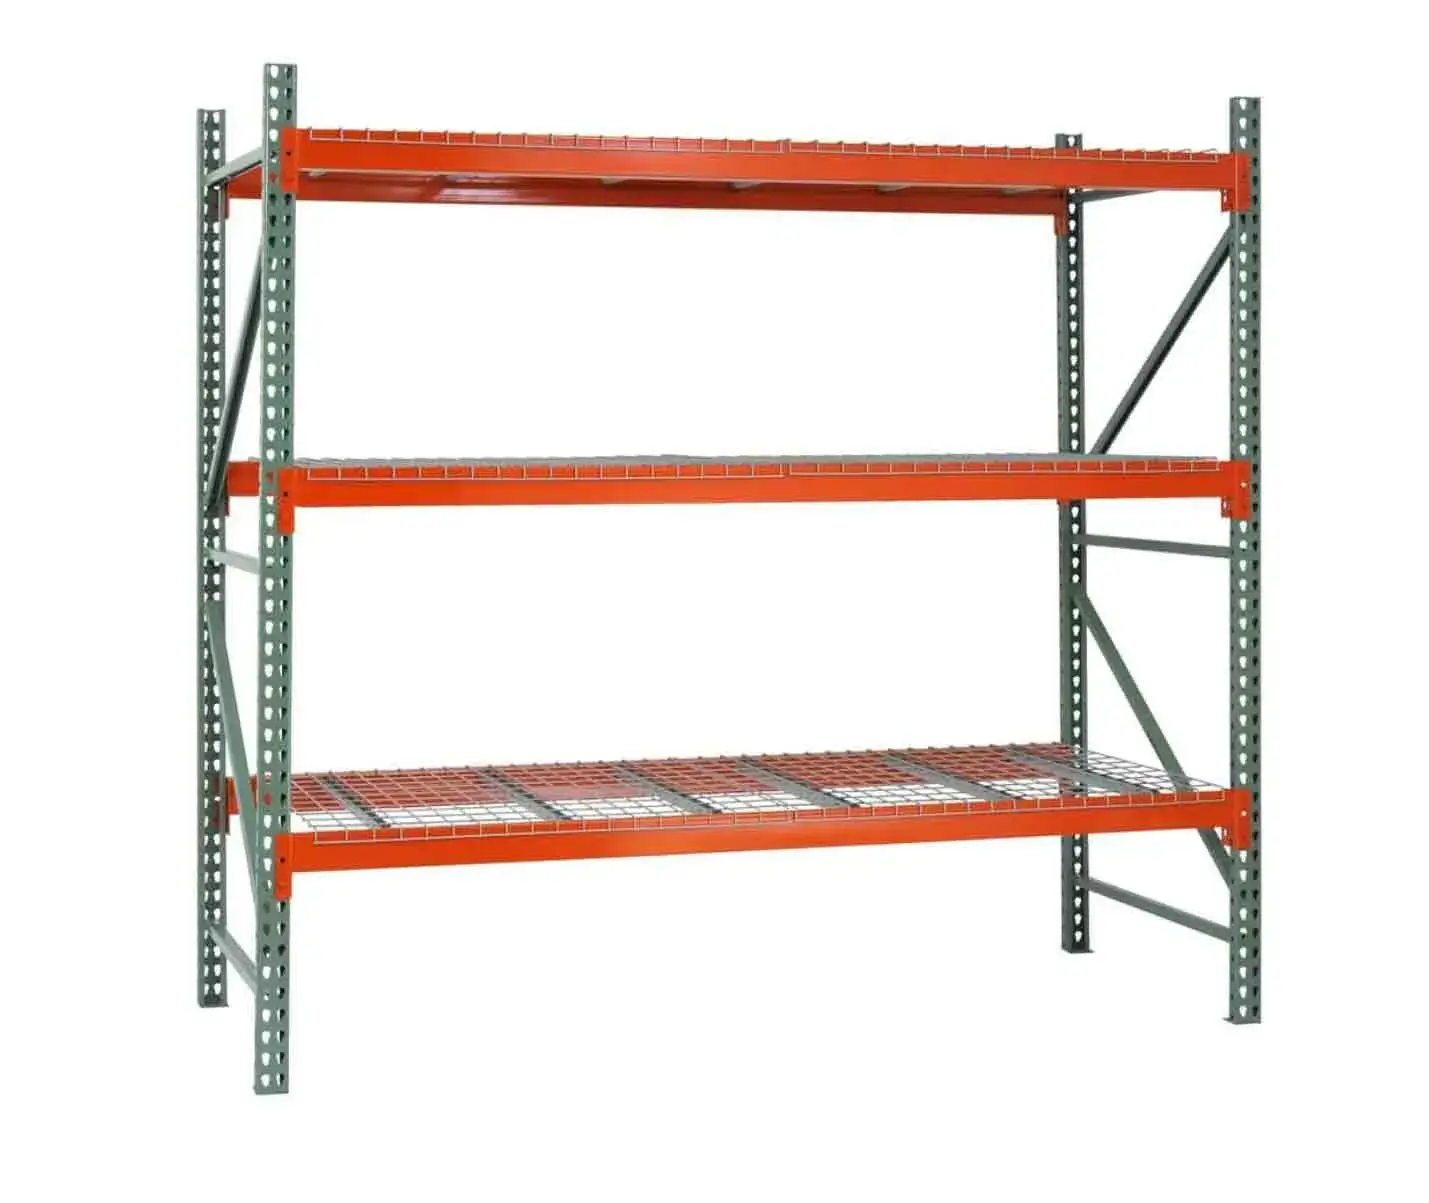 How To Increase Warehouse Storage Efficiency With Pallet Rack? Suppliers